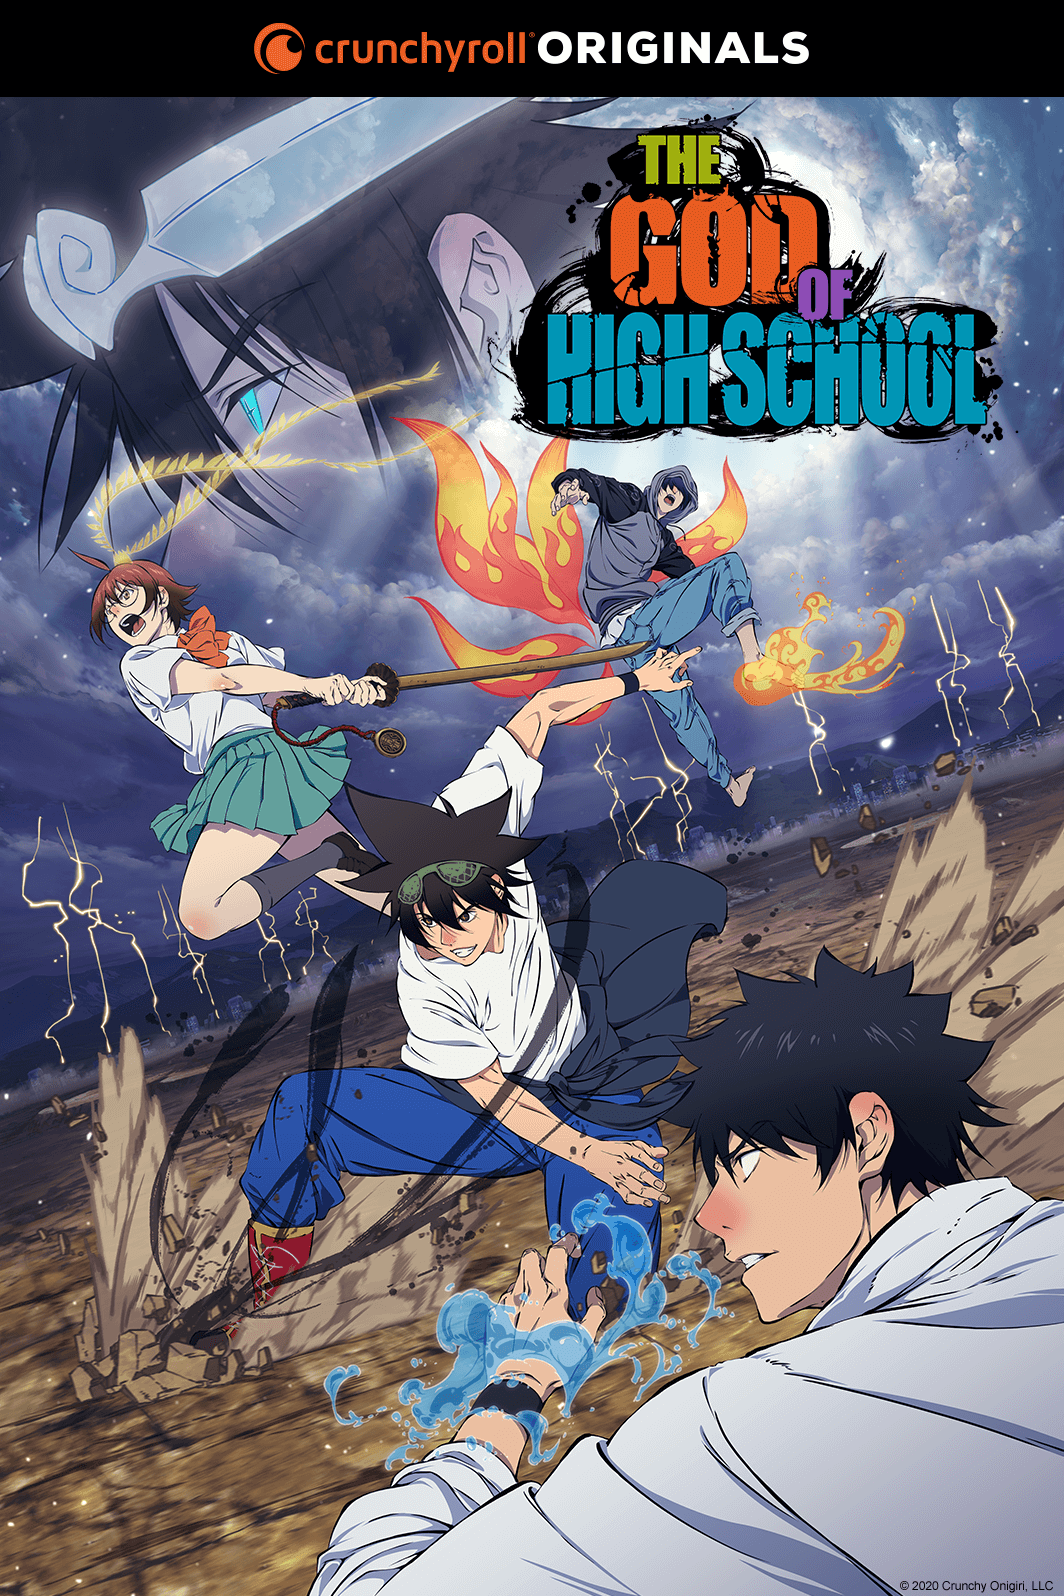 God of High School anime premieres on July 6th, key art and final trailer